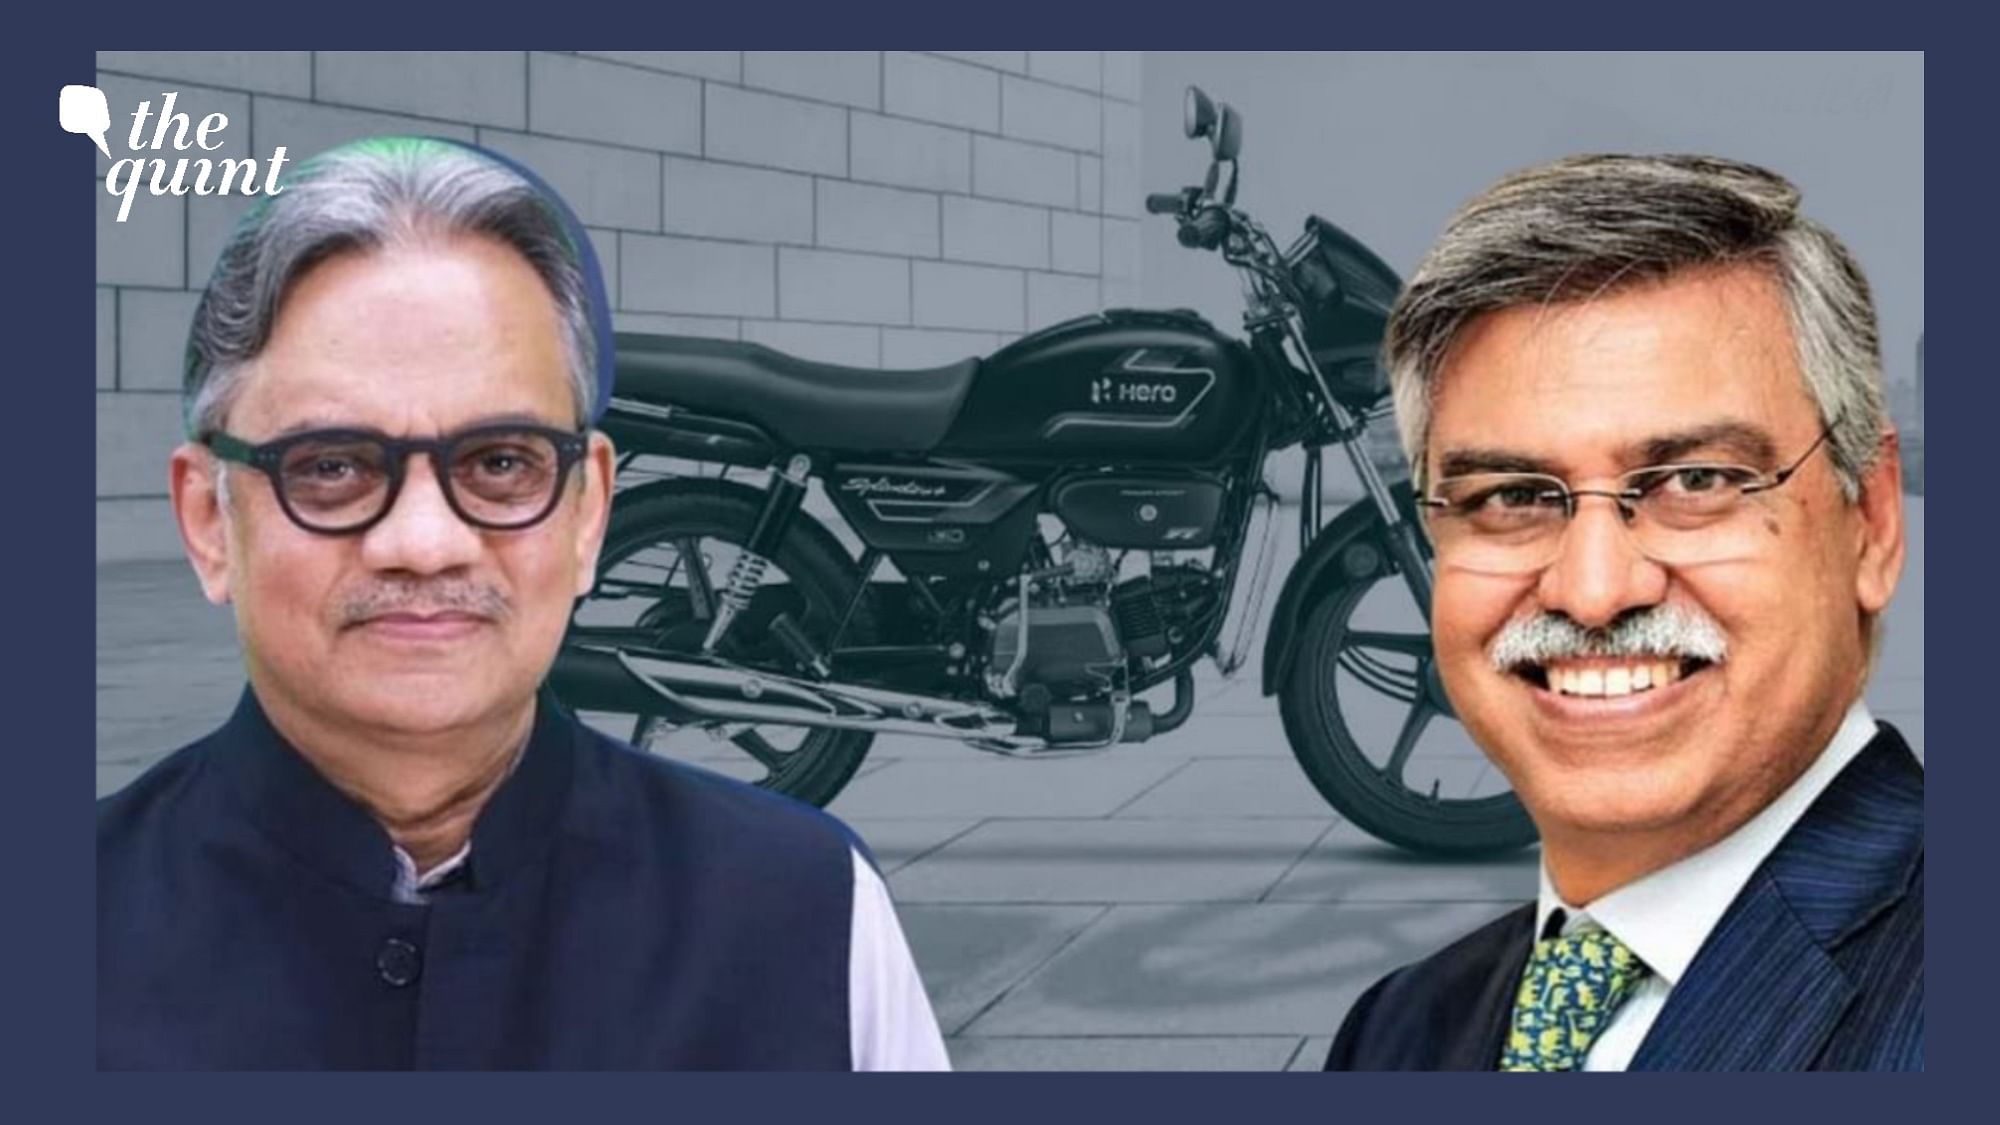 Hero Enterprise chairman and former managing director of Hero Moto Corp Sunil Kant Munjal speaks with The Quint’s Editorial Director Sanjay Pugalia on his new book ‘The Making of Hero’.